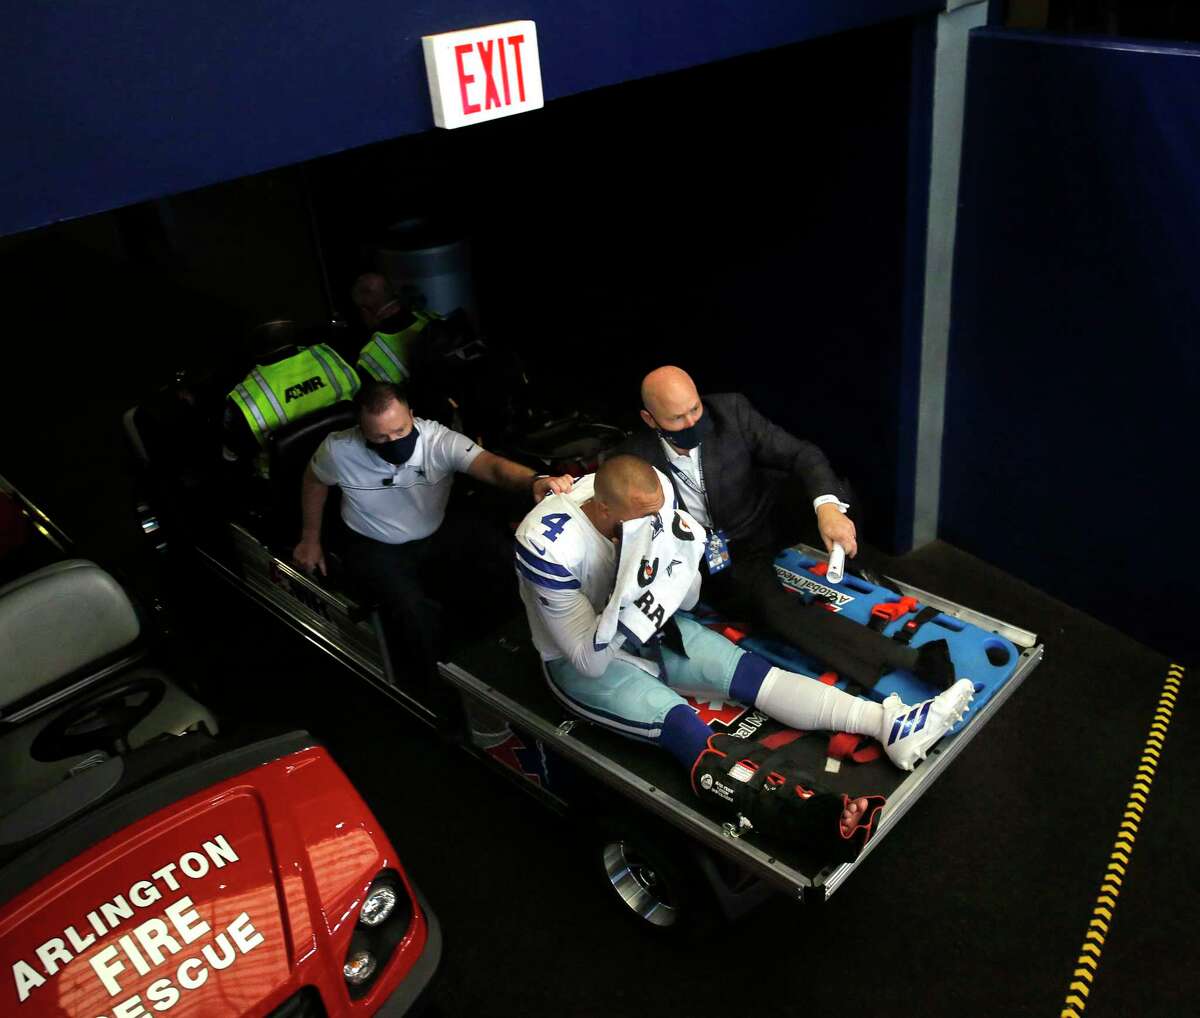 Dallas Cowboys quarterback Dak Prescott (4) is carted off the field after sustaining an ankle injury in the third quarter against the New York Giants on Sunday, Oct. 11, 2020 at AT&T Stadium Stadium in Arlington, Texas.